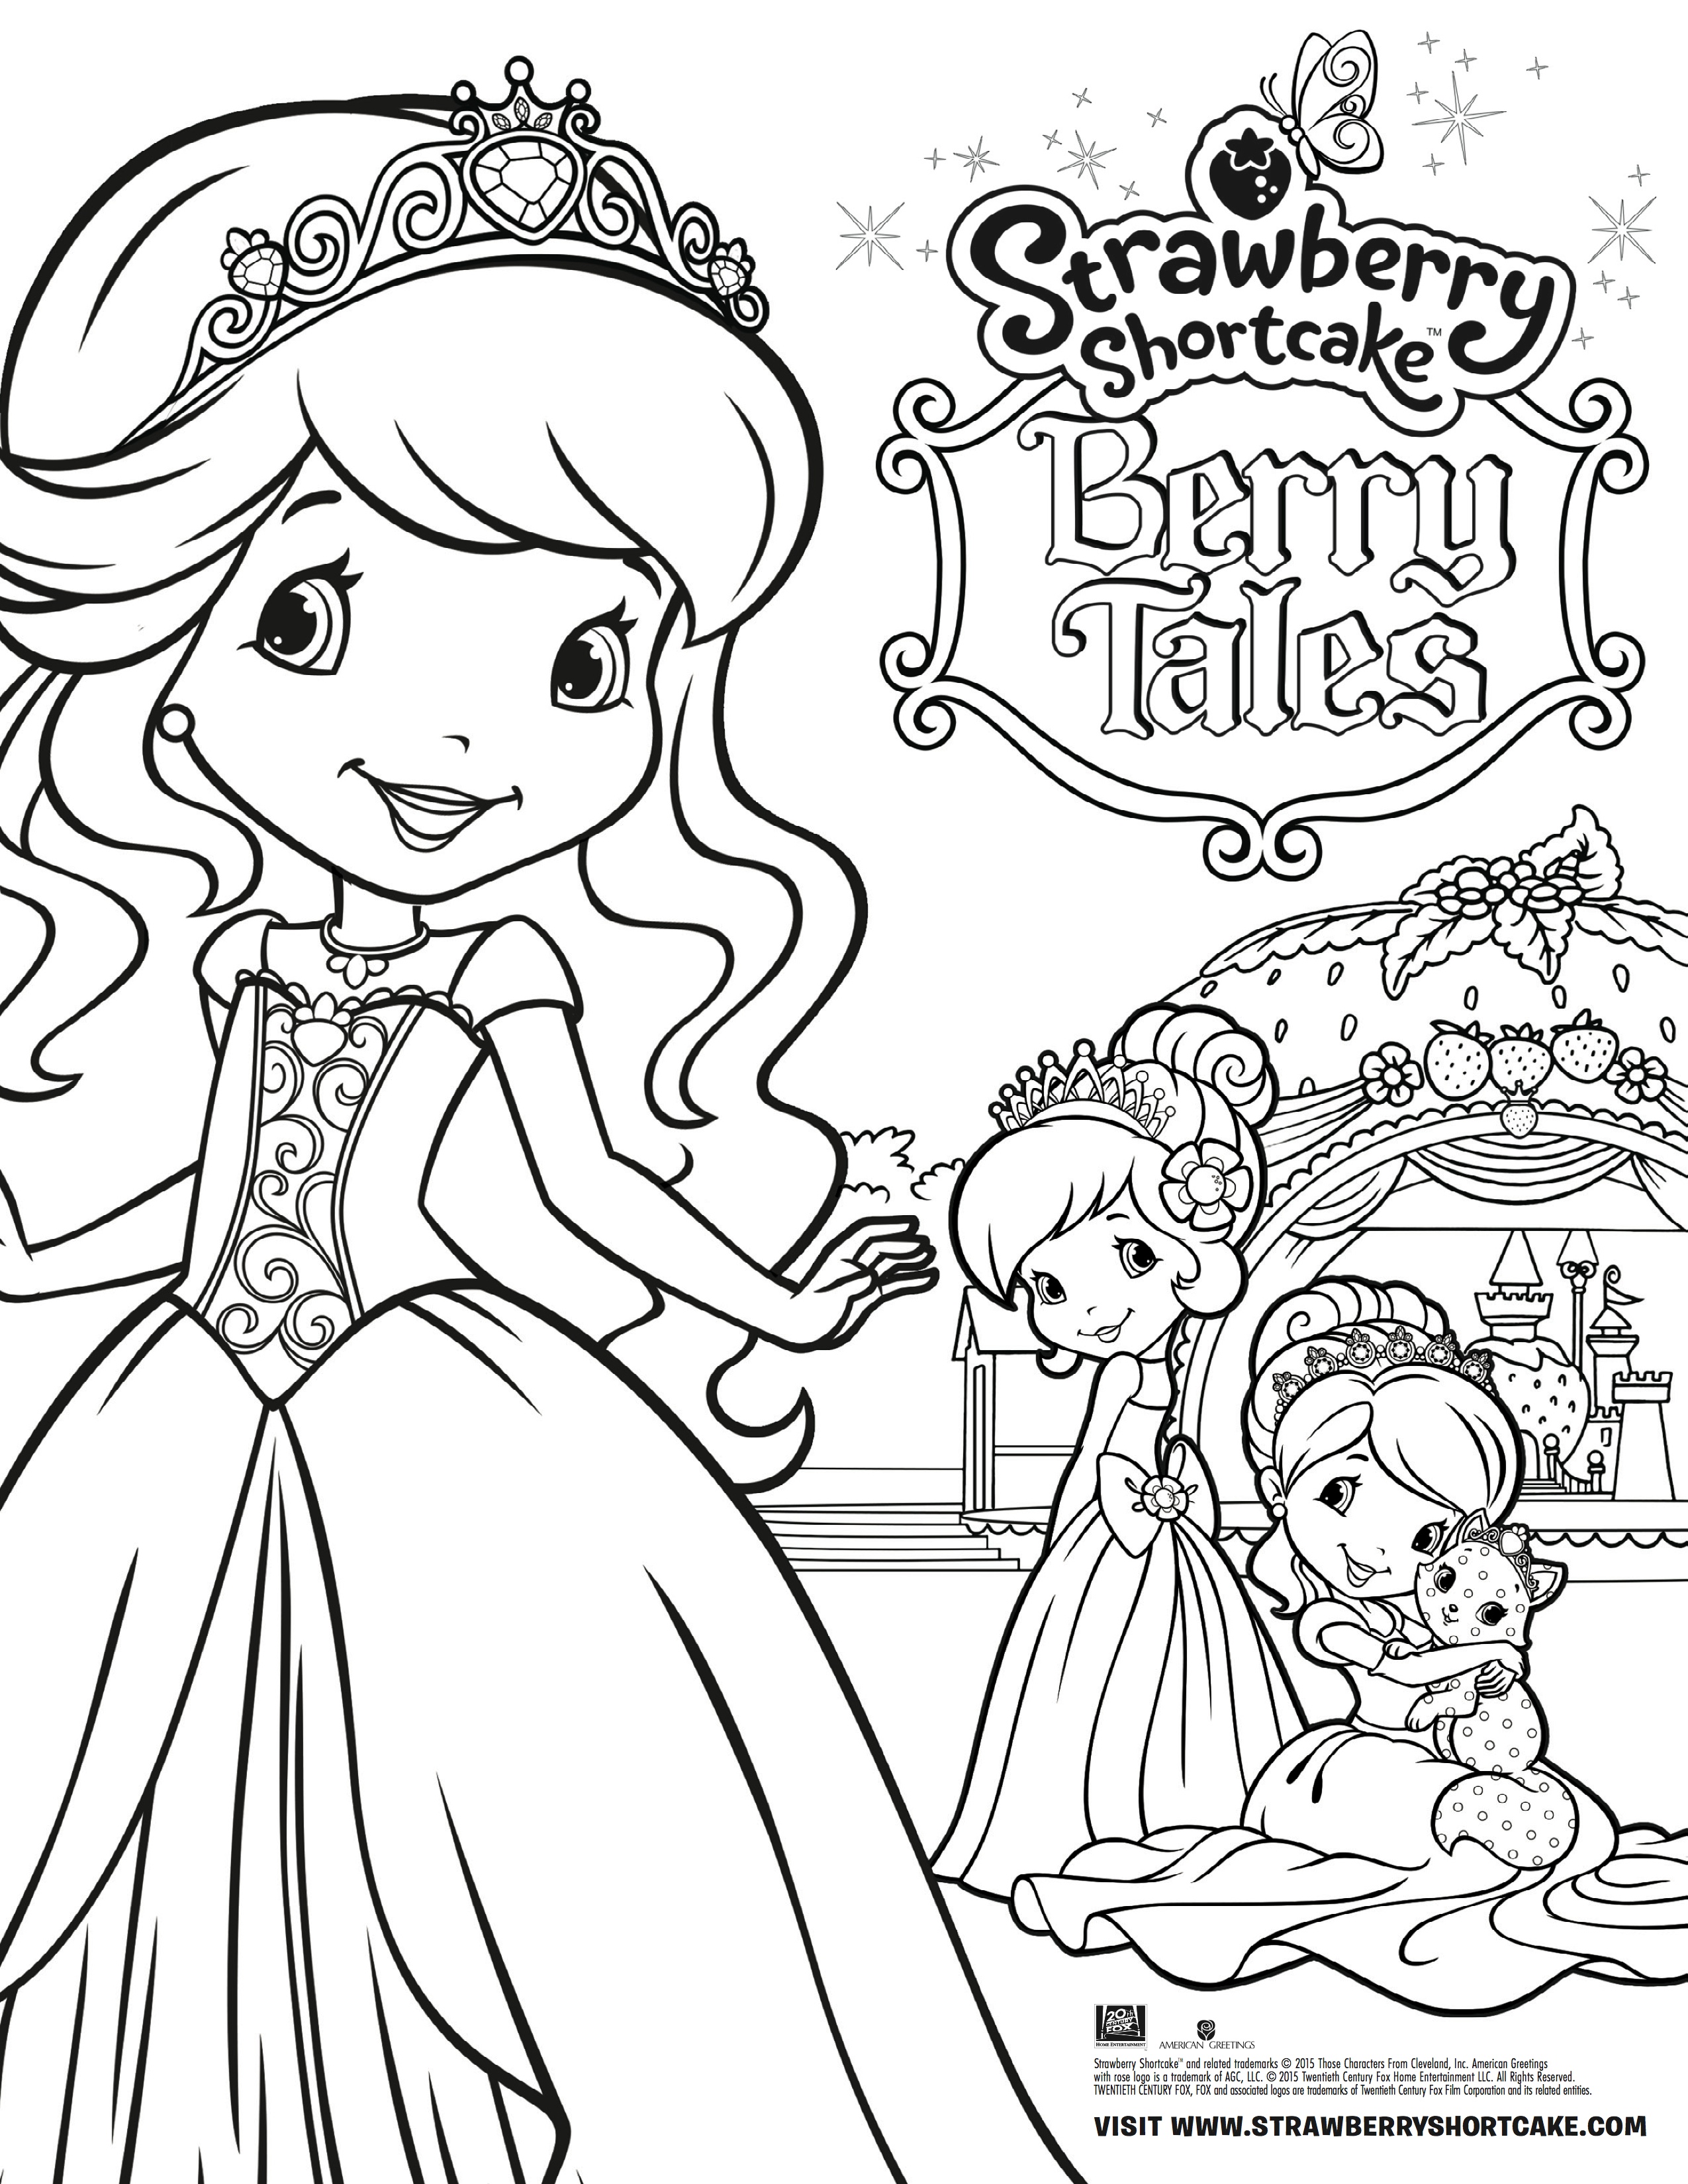 Strawberry Shortcake Berry Tales Coloring Page